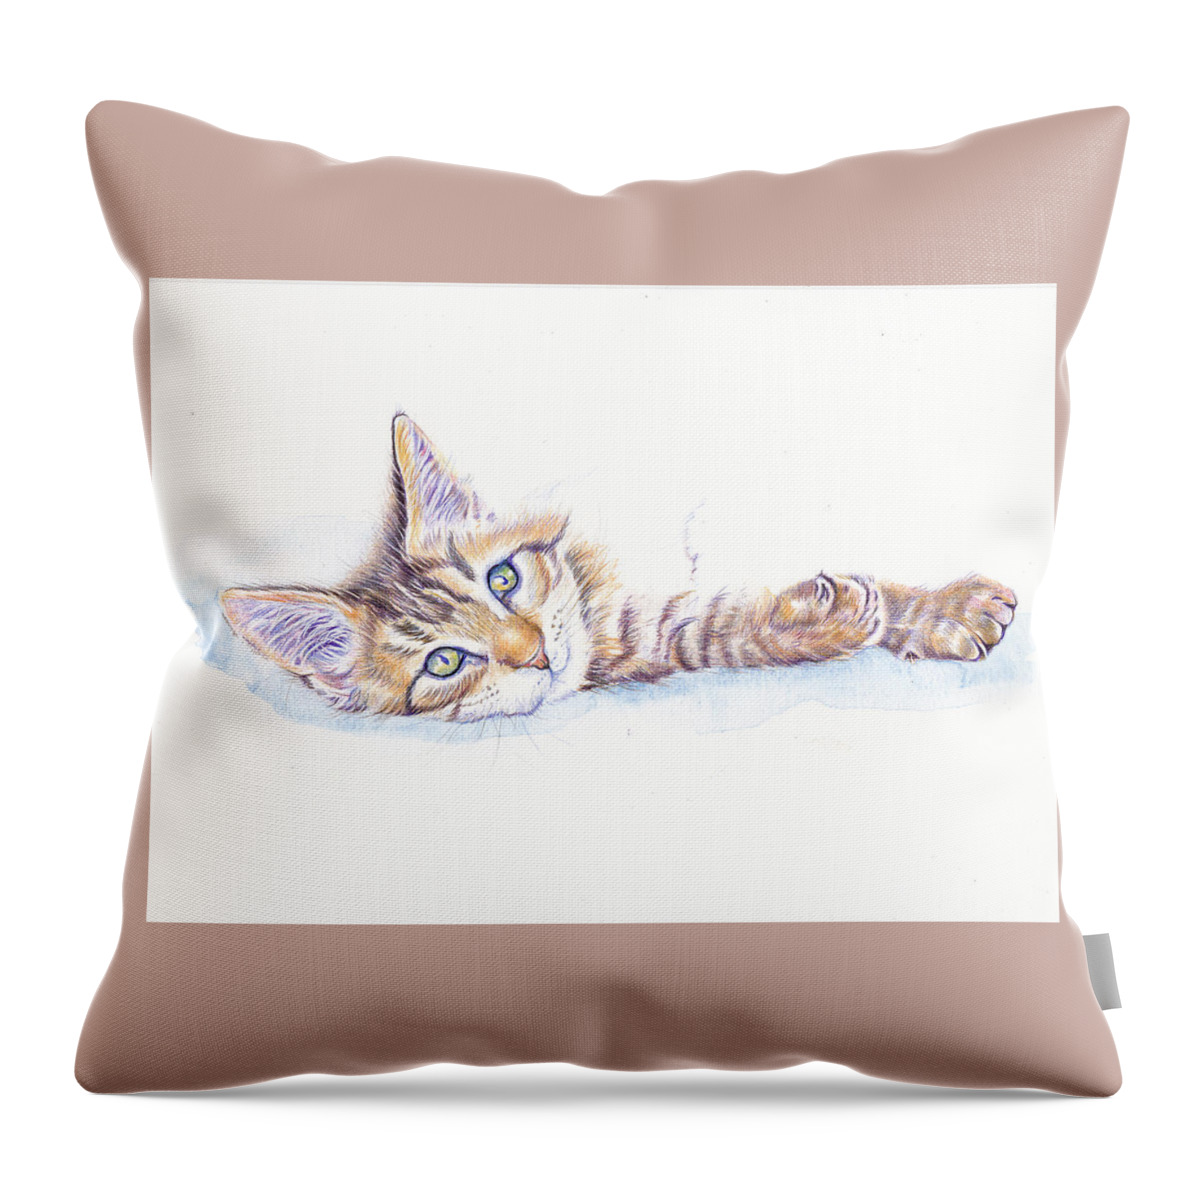 Kitten Throw Pillow featuring the painting Bright Eyes - Tabby Kitten by Debra Hall